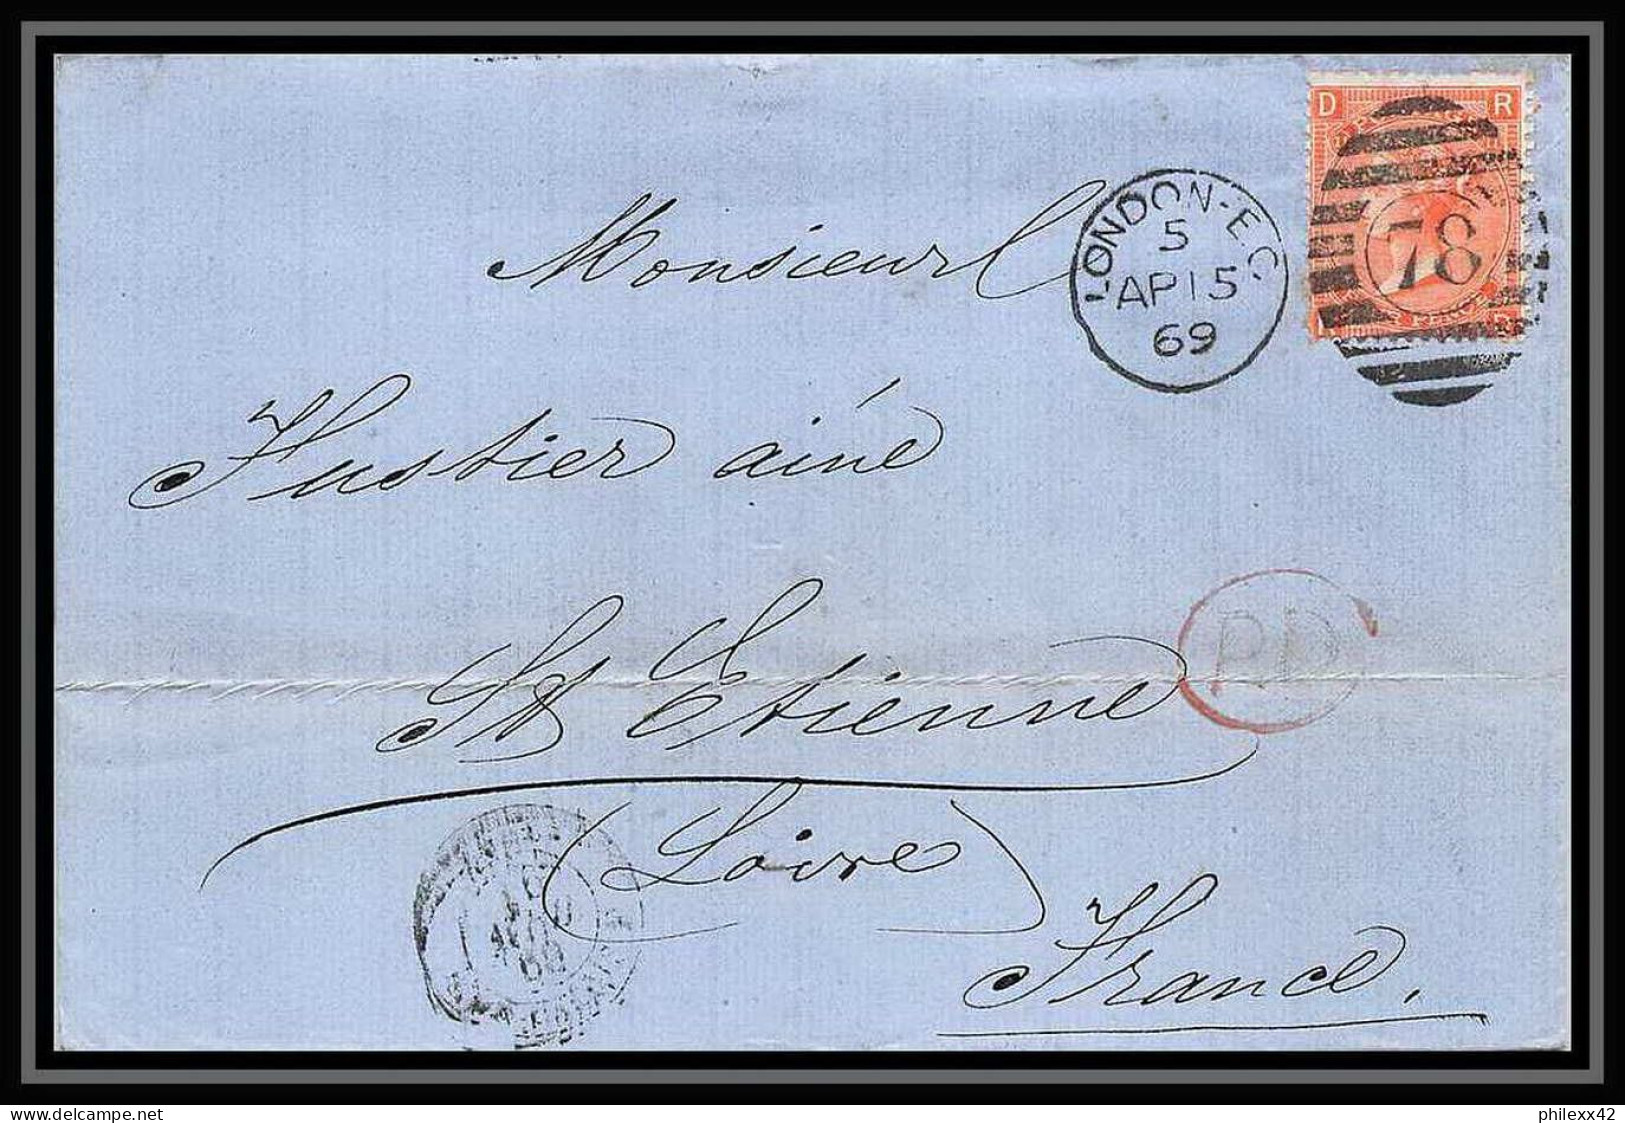 35743 N°32 Victoria 4p Red London St Etienne France 1869 Cachet 78 Lettre Cover Grande Bretagne England - Covers & Documents